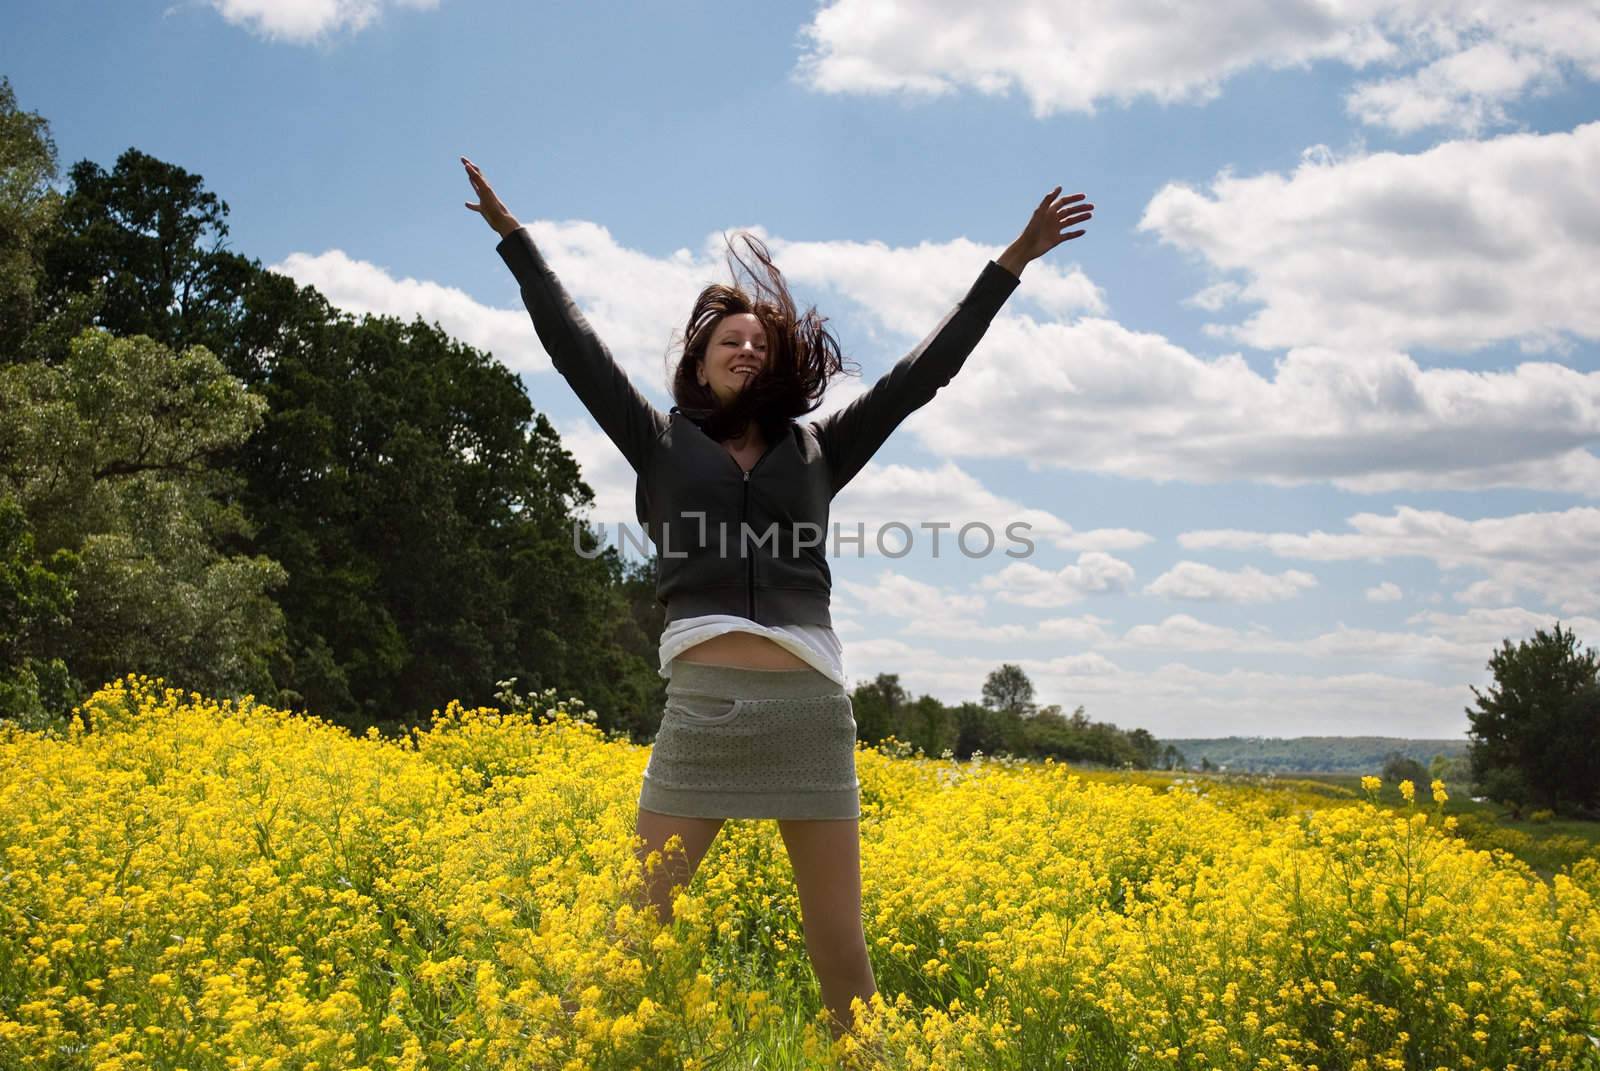 The happy girl jumps in the field of yellow flowers